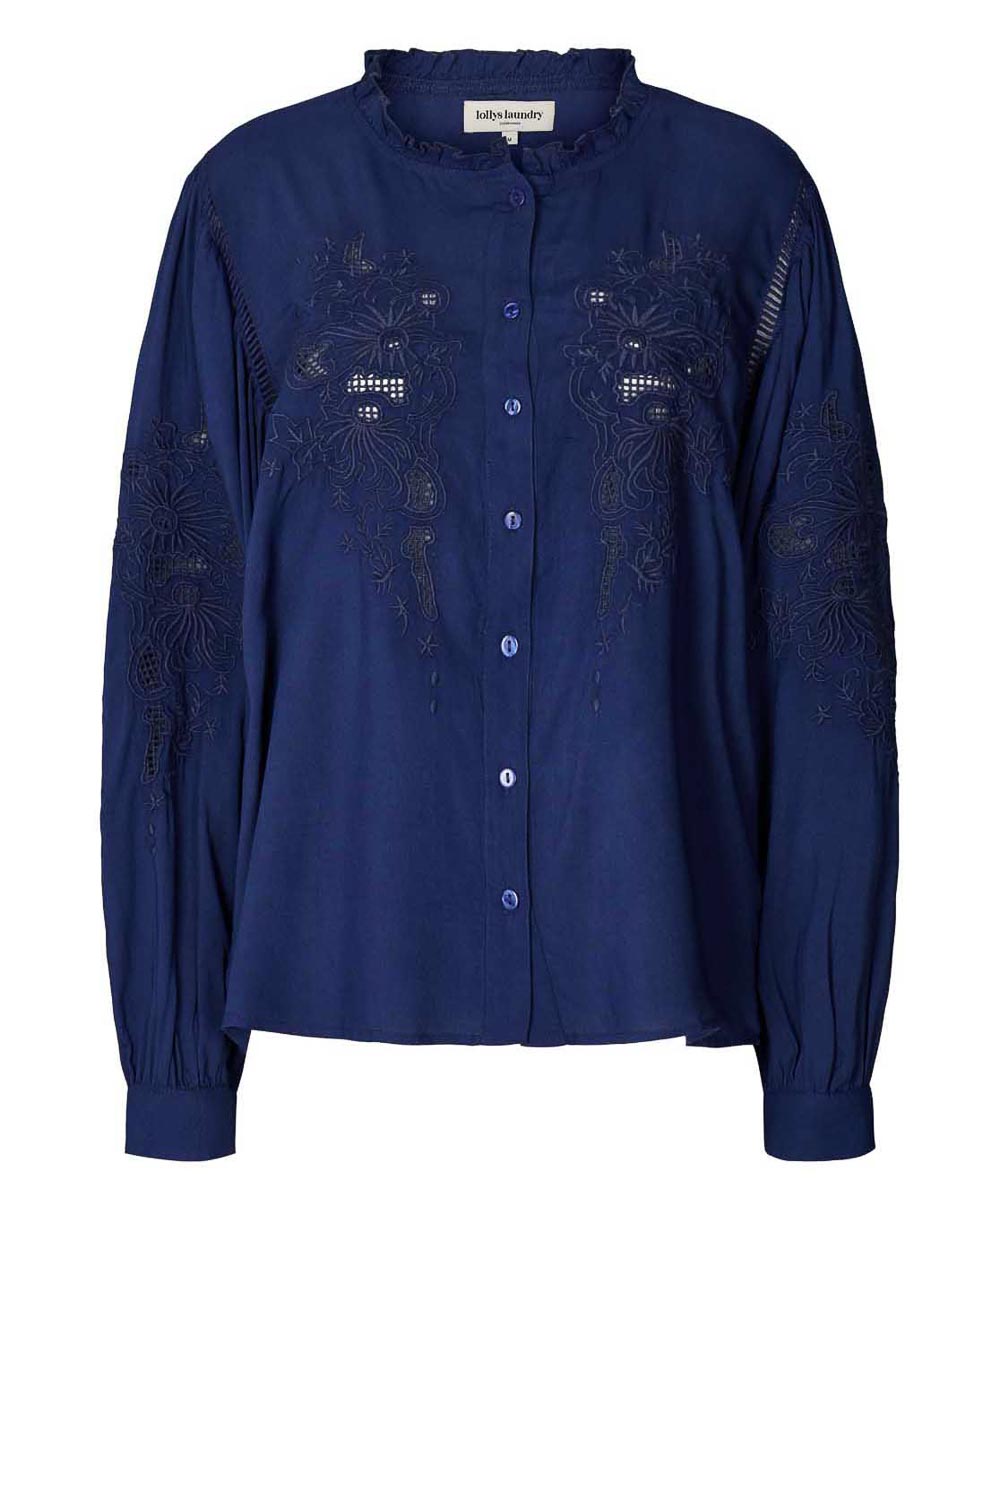 Lollys Laundry Broderie blouse Valentina donkerblauw